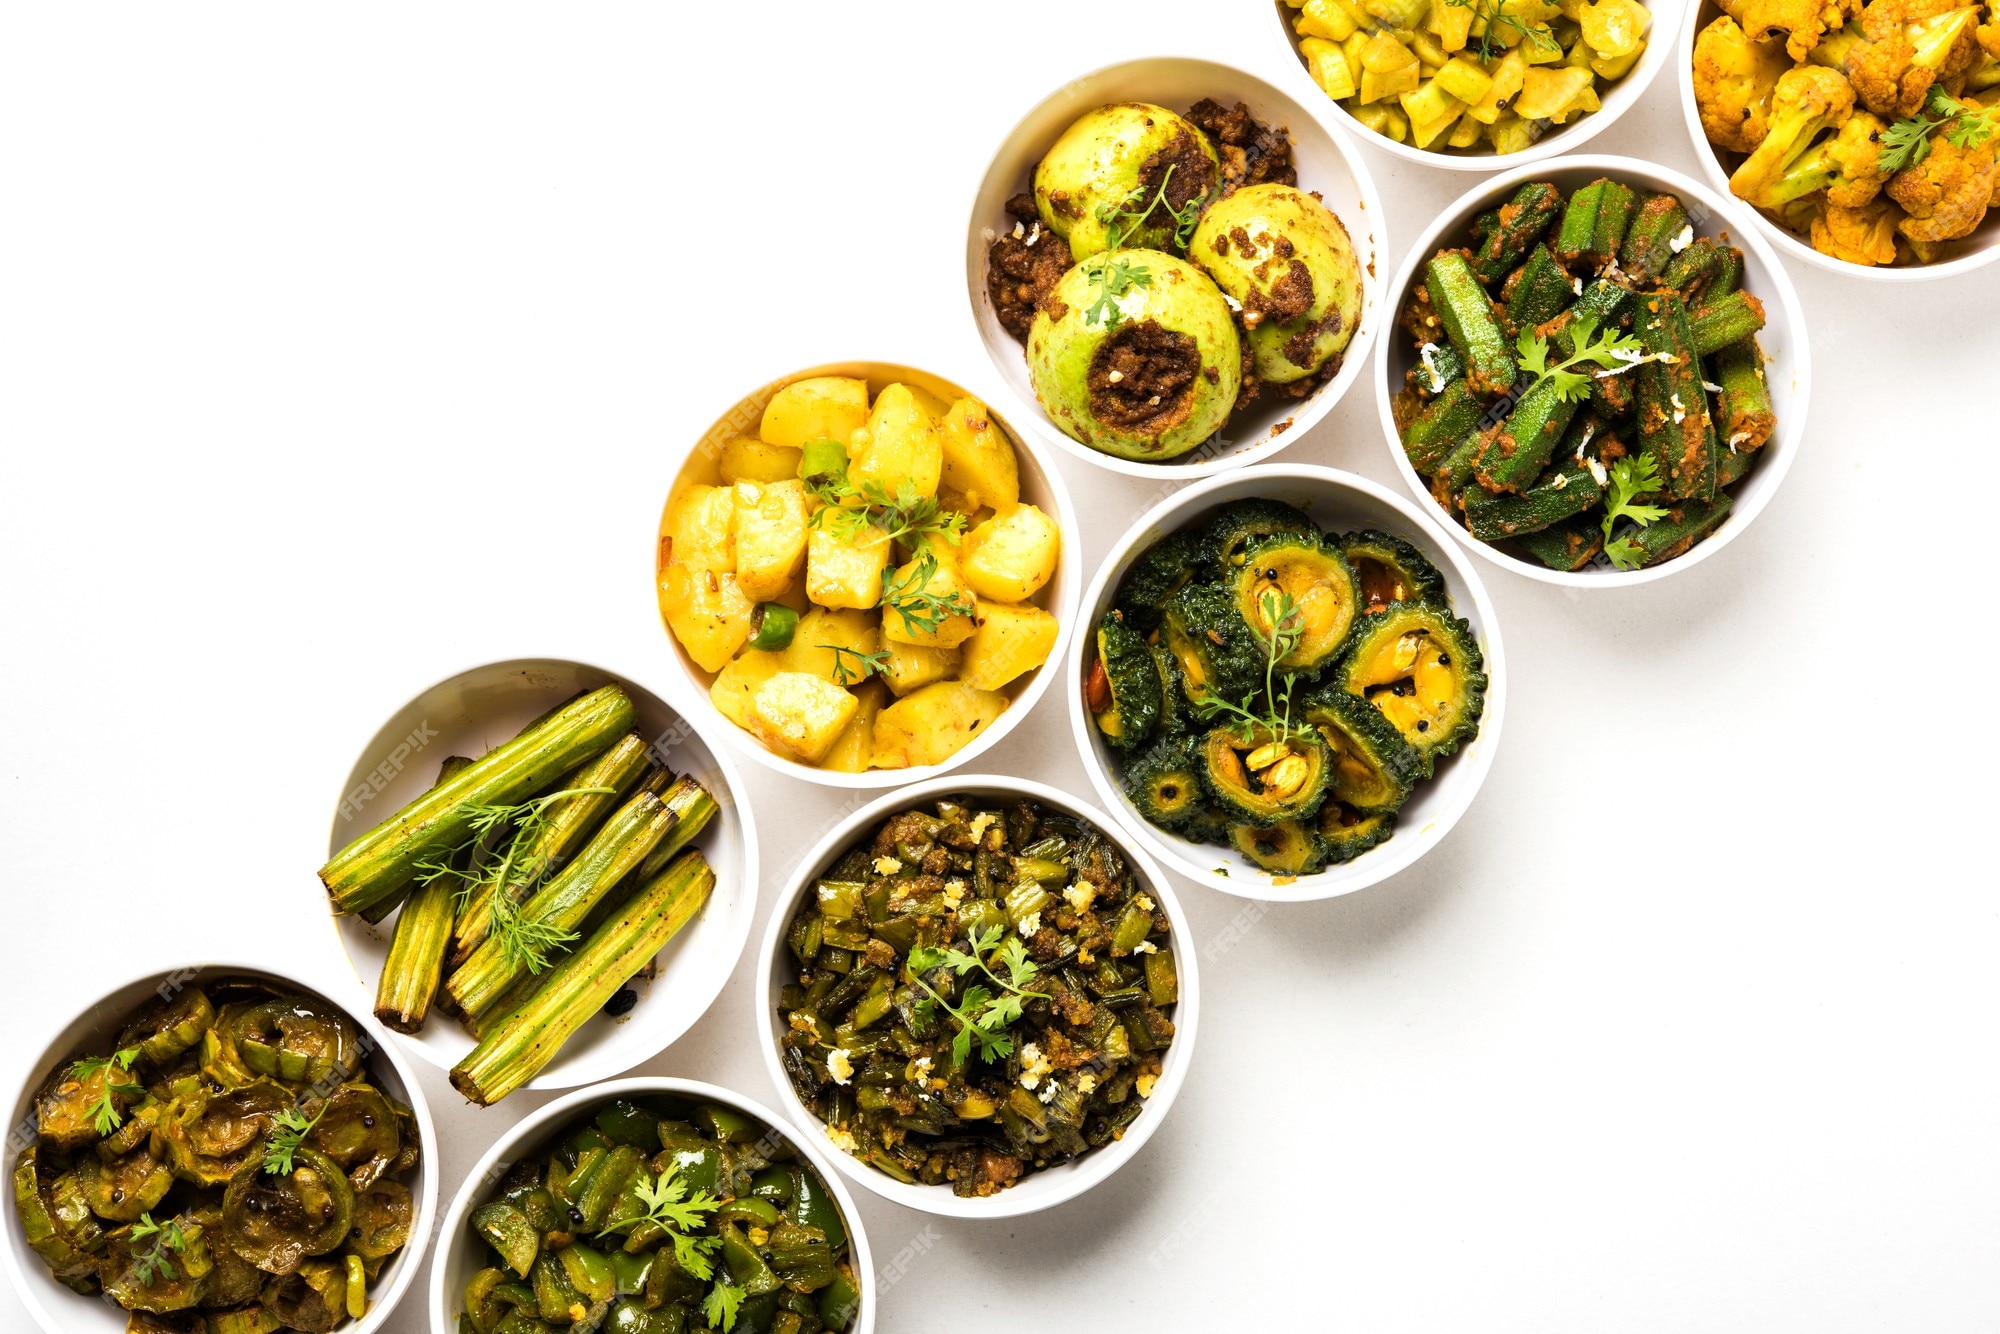 Premium Photo | Indian sabzi, vegetable fried recipes served in white ...